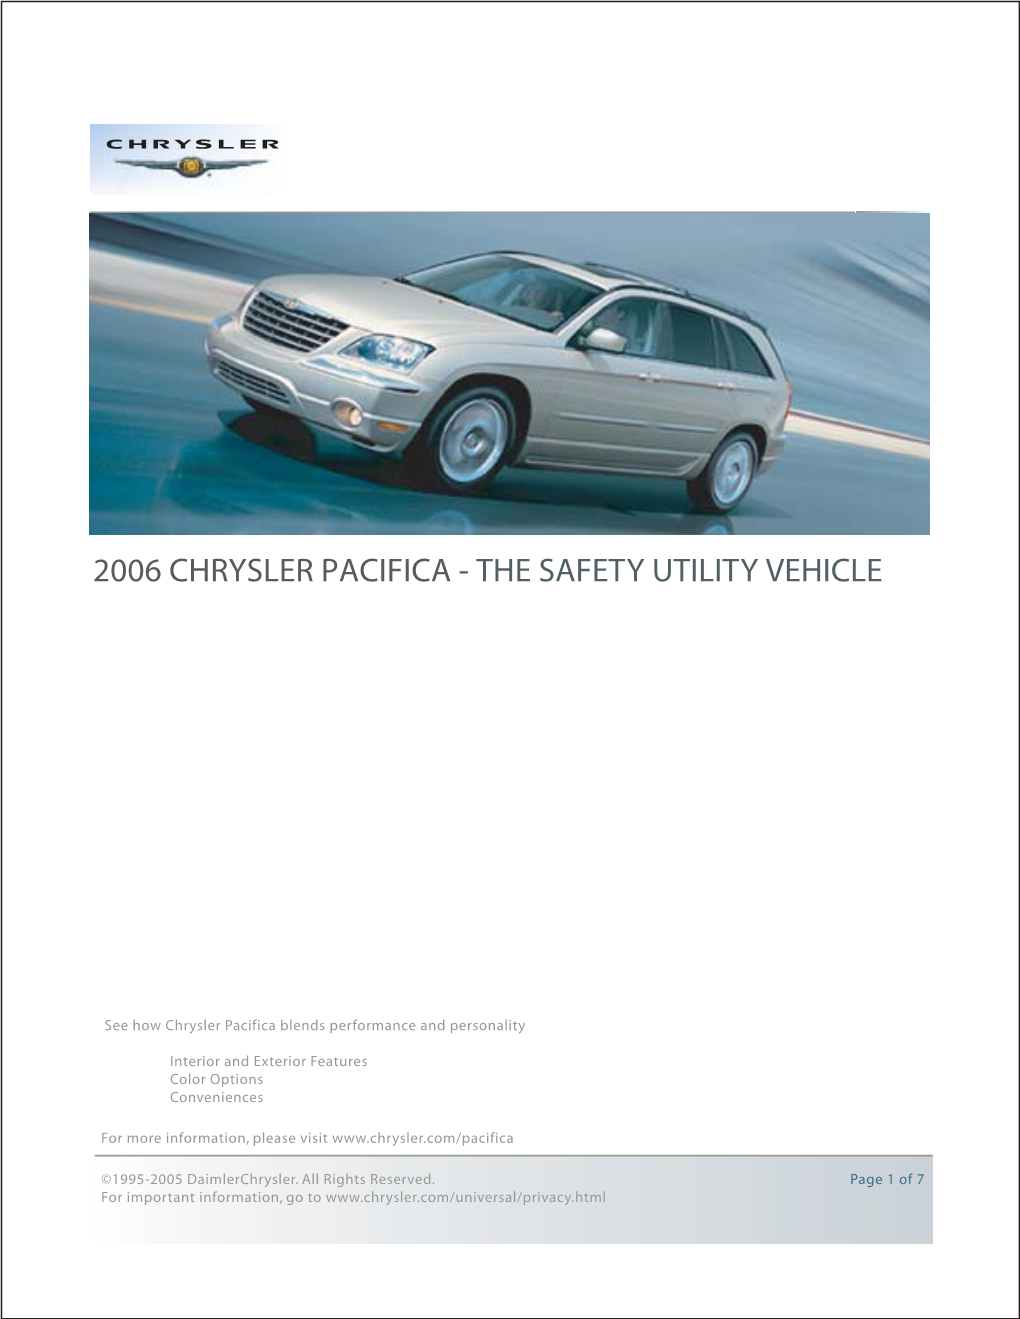 2006 Chrysler Pacifica - the Safety Utility Vehicle